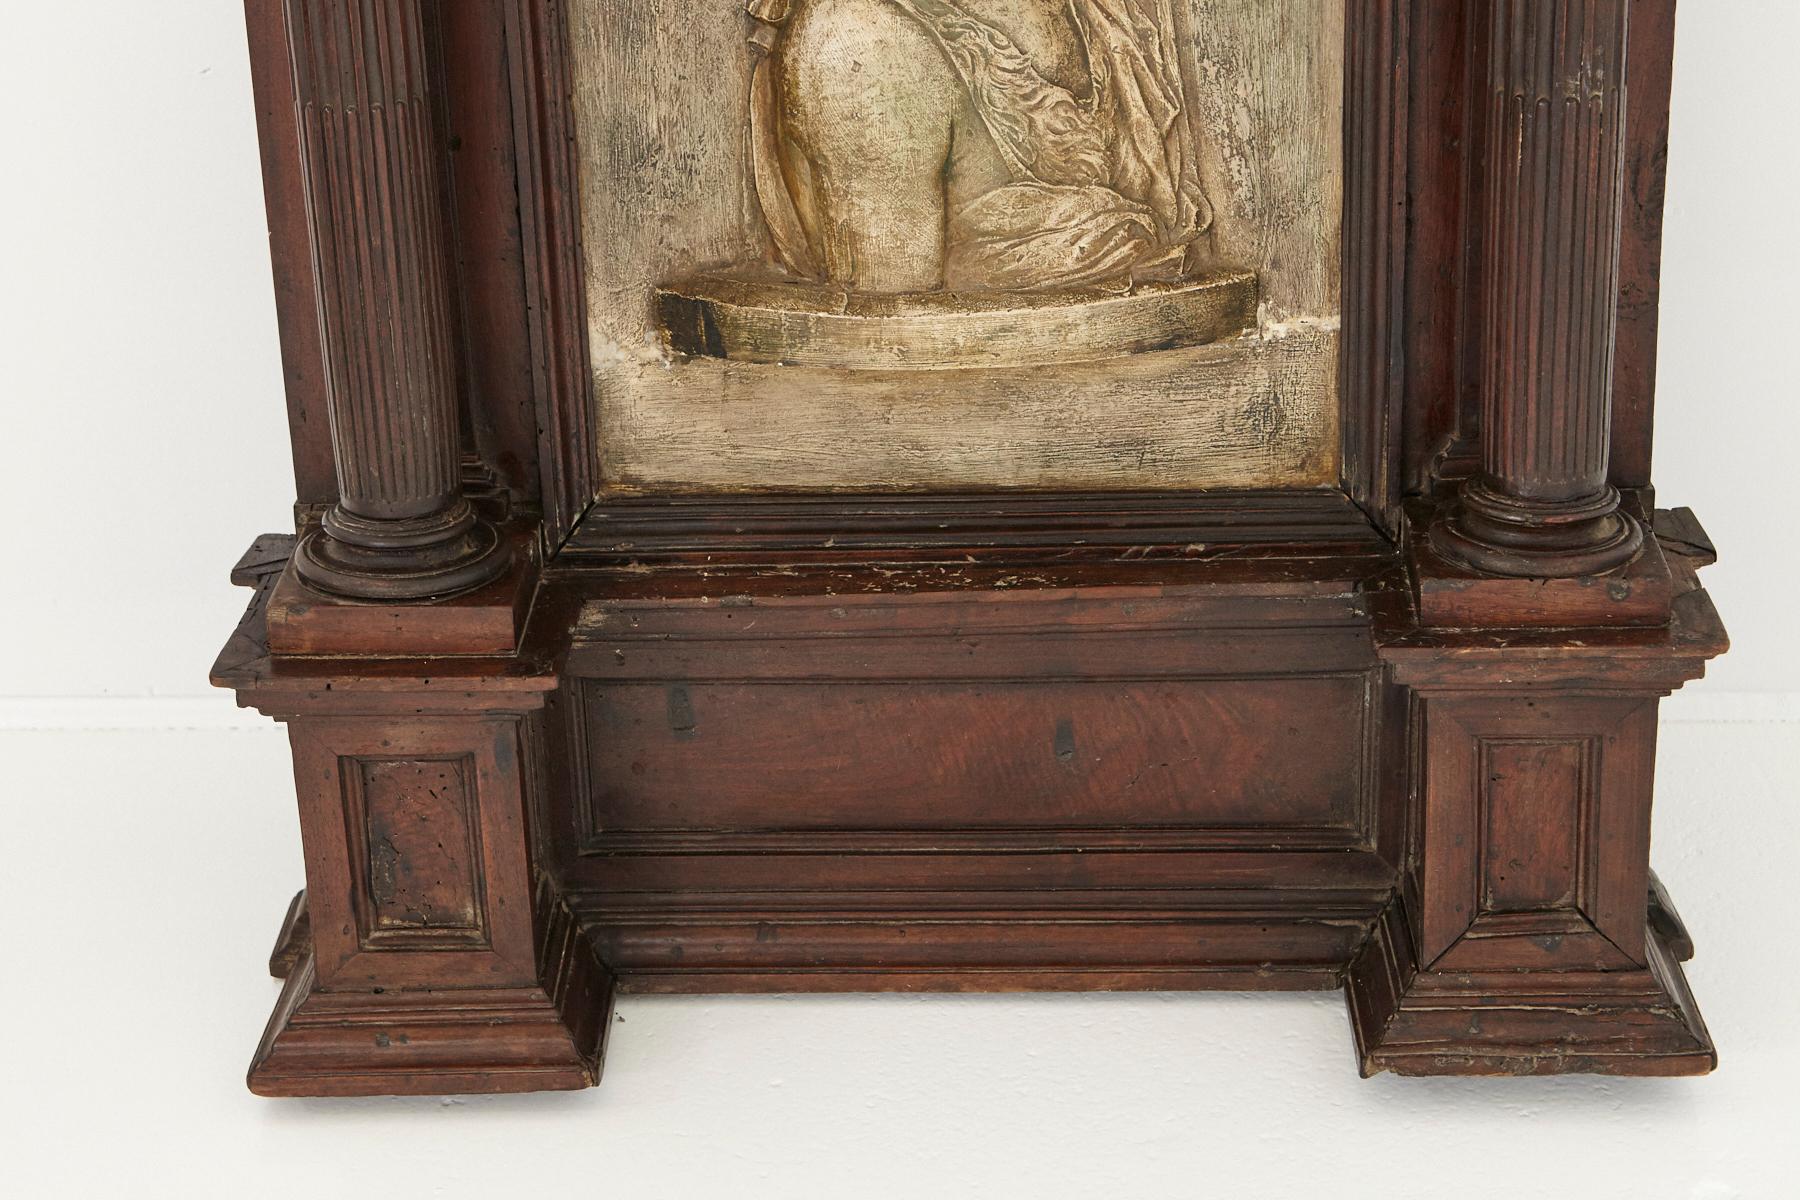 Large Sculptural Italian Baroque Tabernacle Frame, Late 18th Century For Sale 1